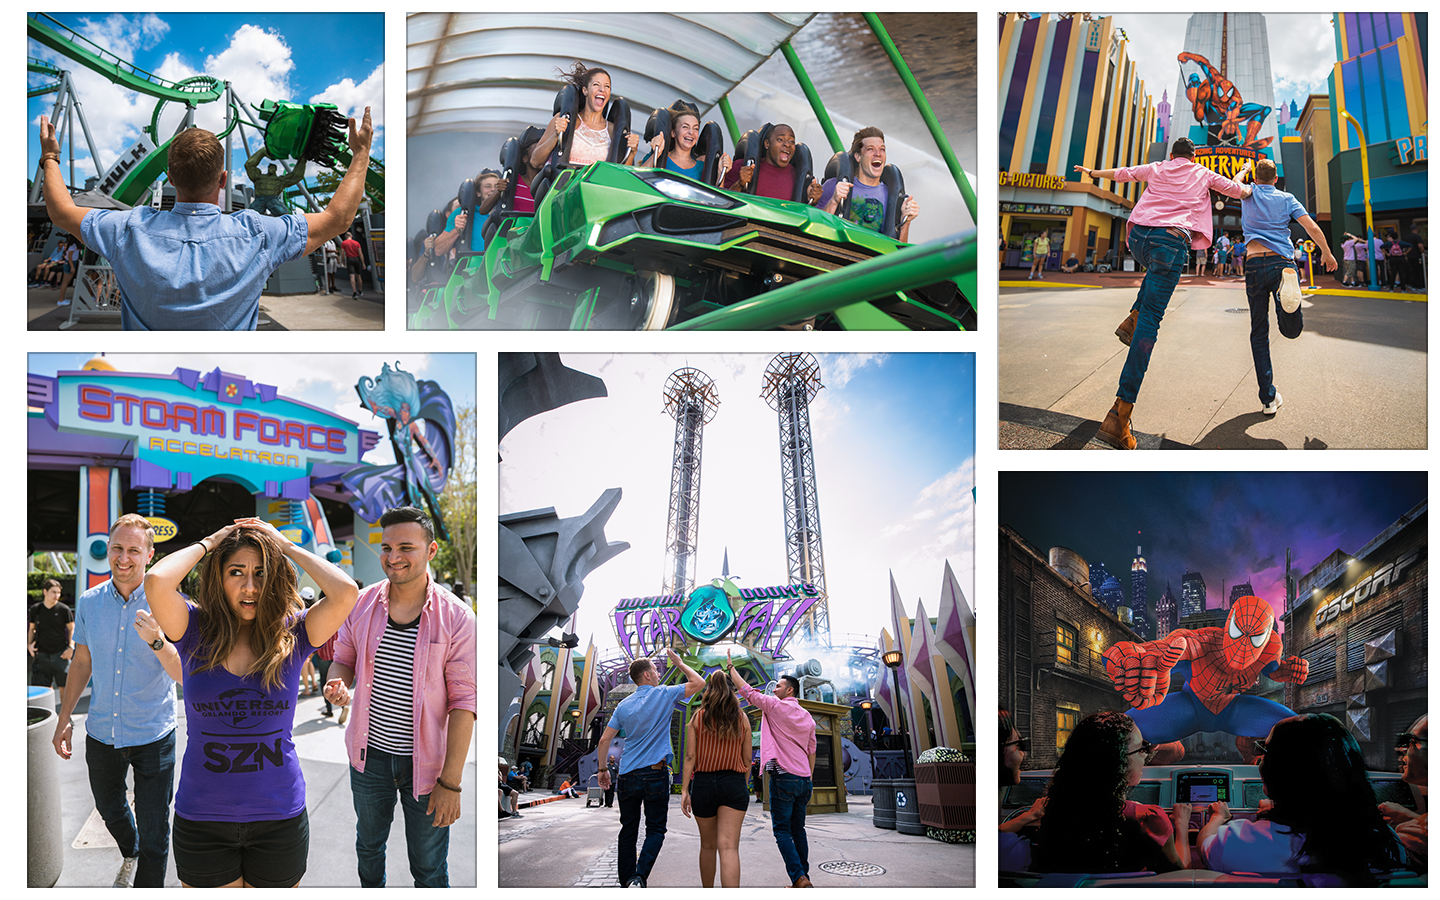 The Incredible Hulk Coaster, The Amazing Adventures of Spider-Man, Doctor Doom's Fearfall and more.